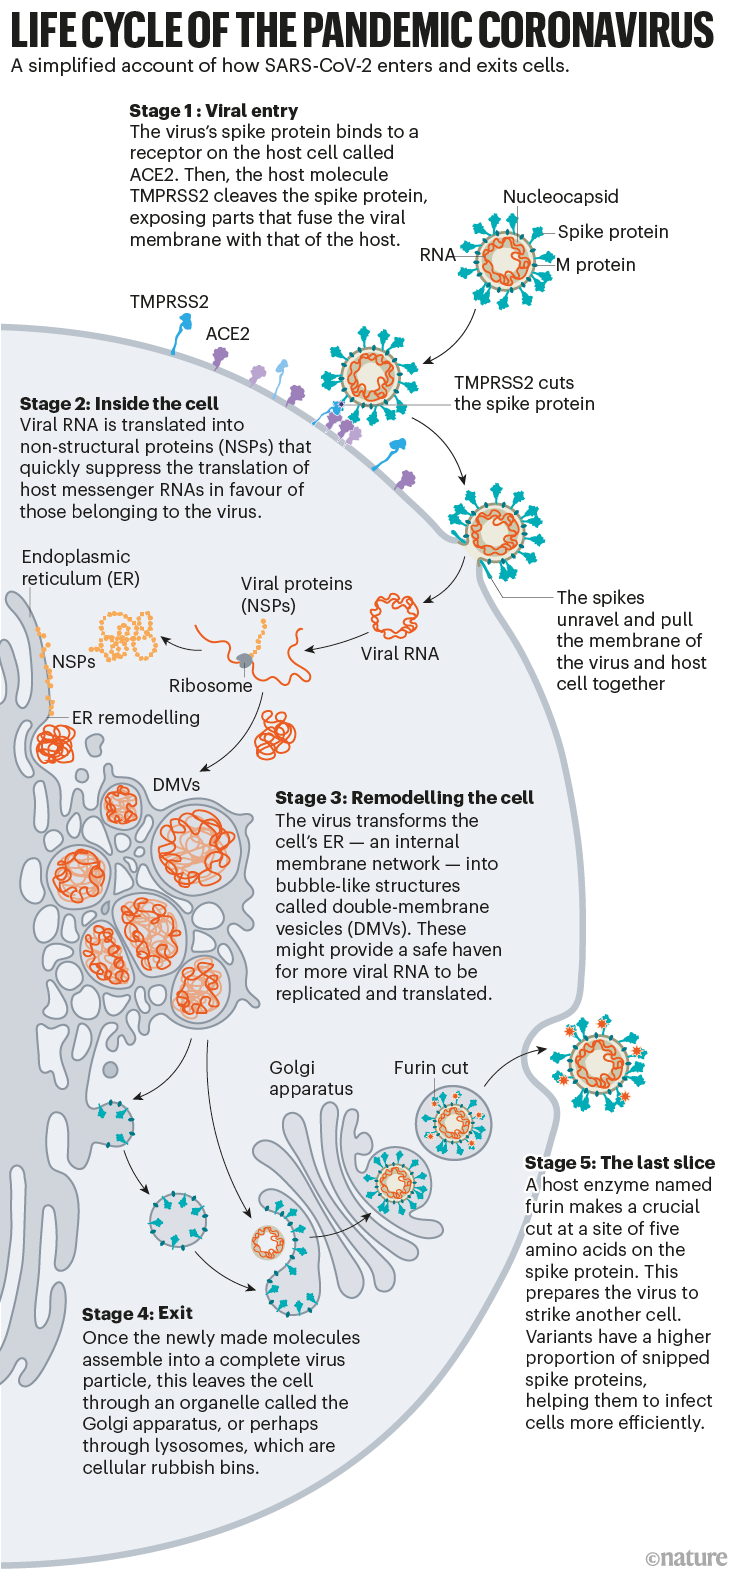 Life cycle of the pandemic coronavirus: Infographic showing how the virus enters, adapts and exits from host cells.